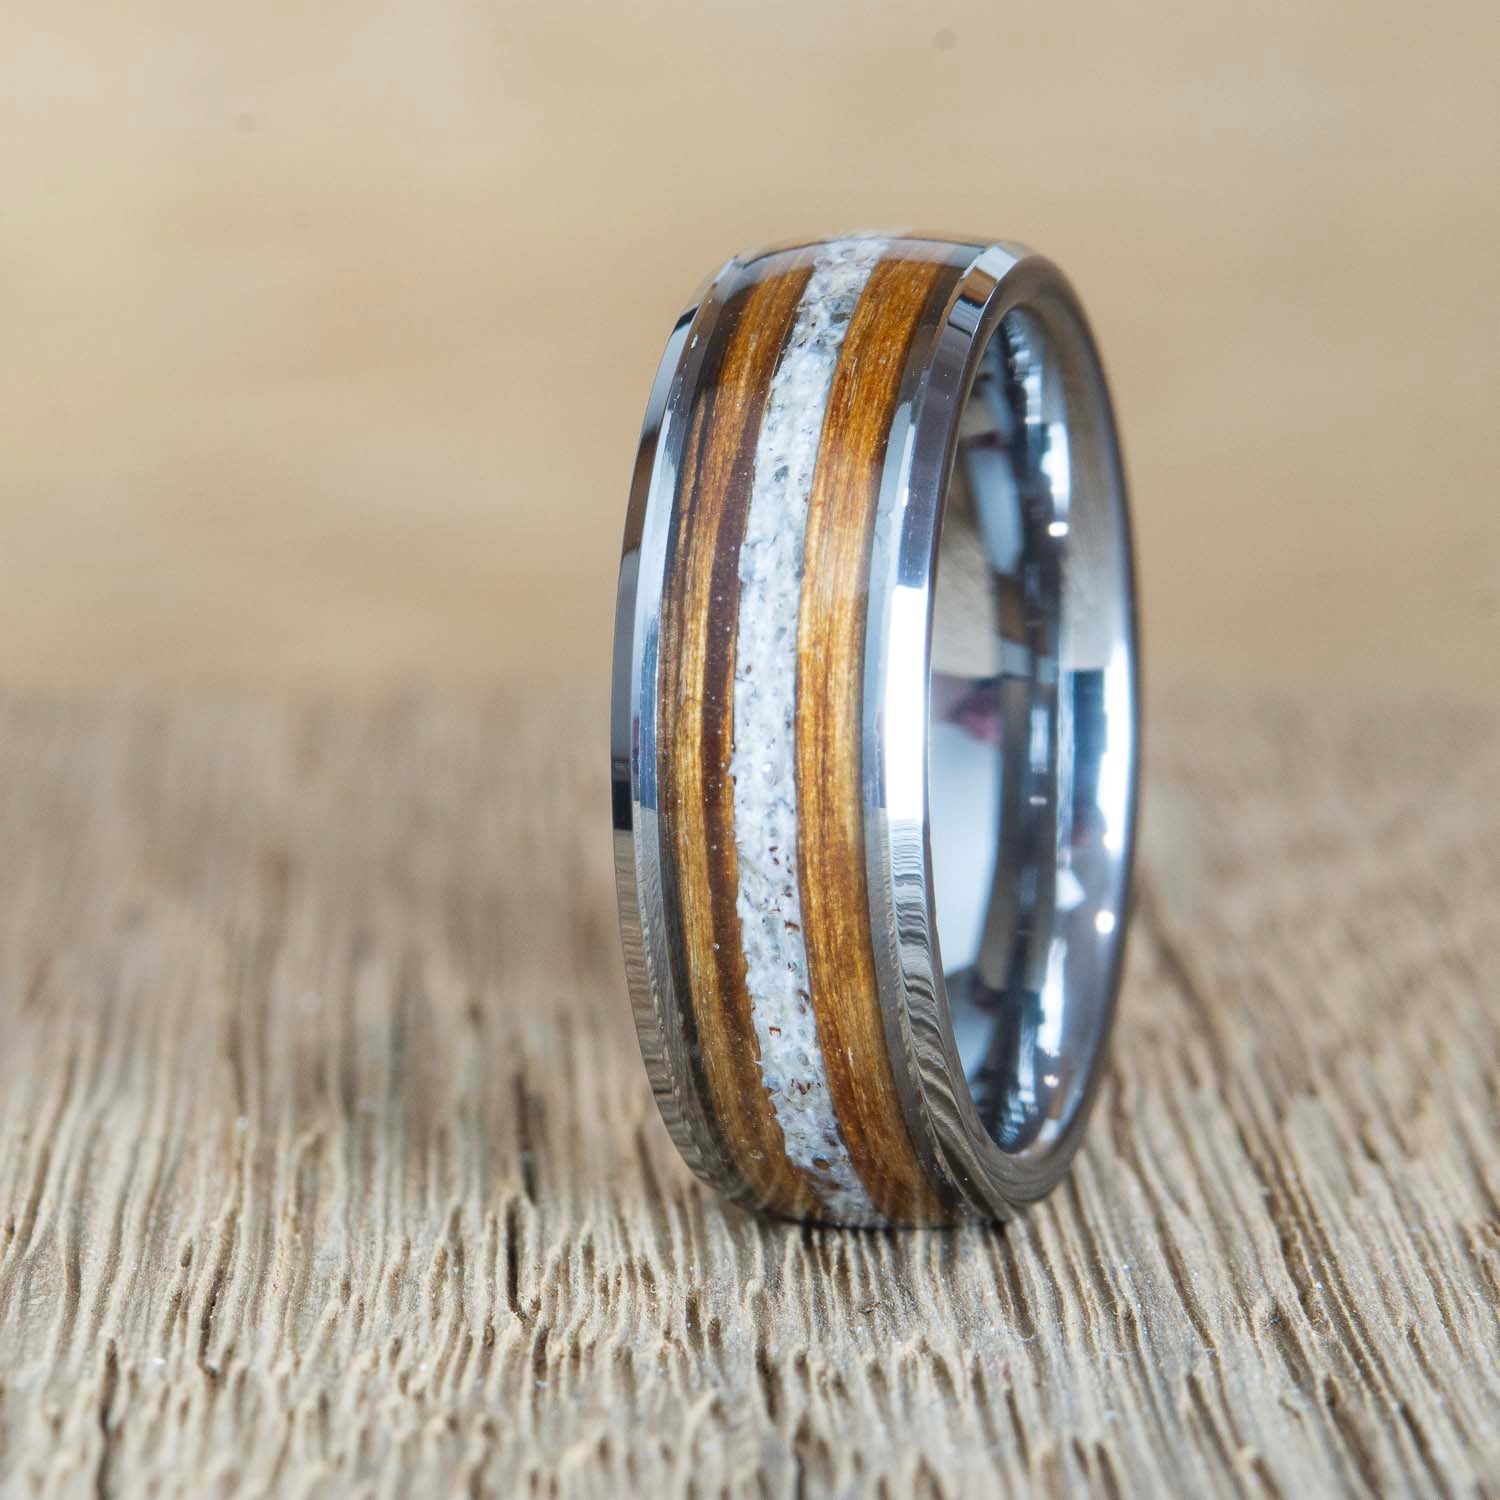 "Deer Camp" Hunter's wedding ring with Whiskey barrel wood and Antler